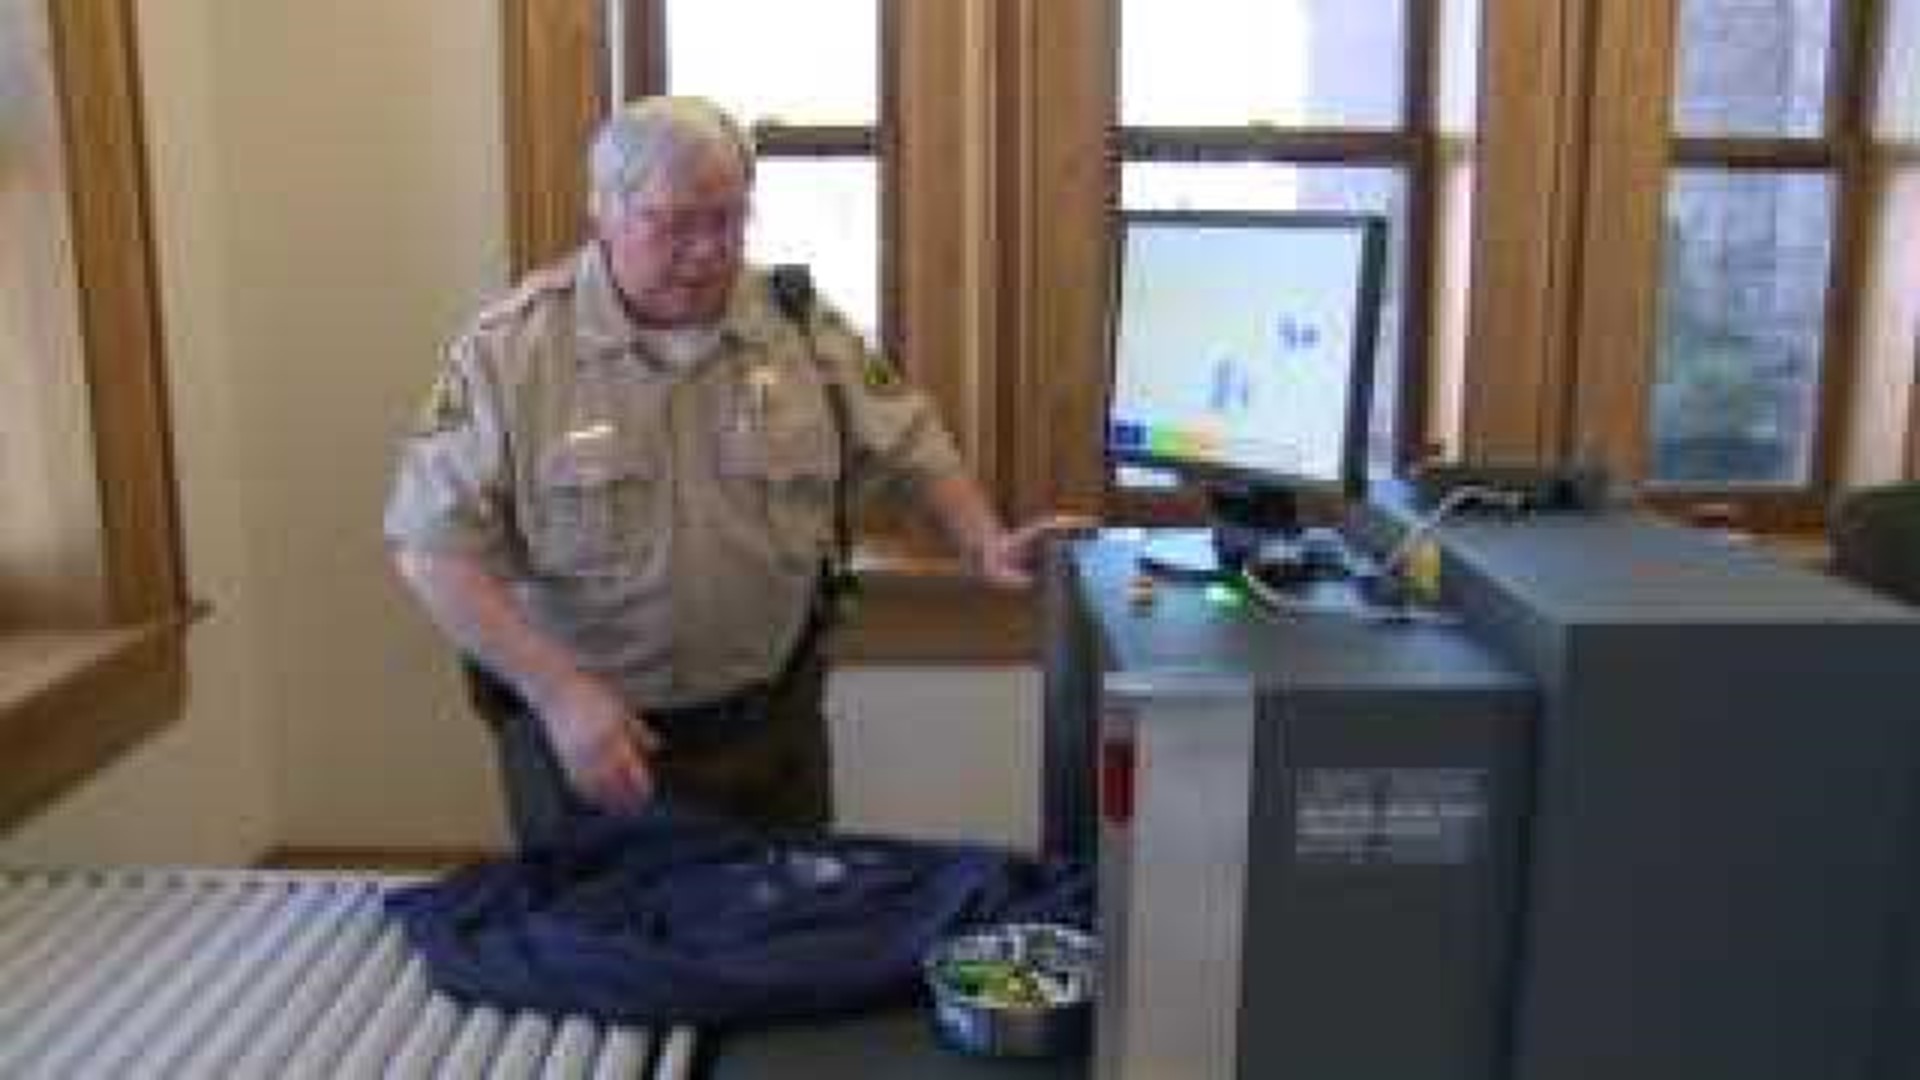 Clinton County Courthouse security